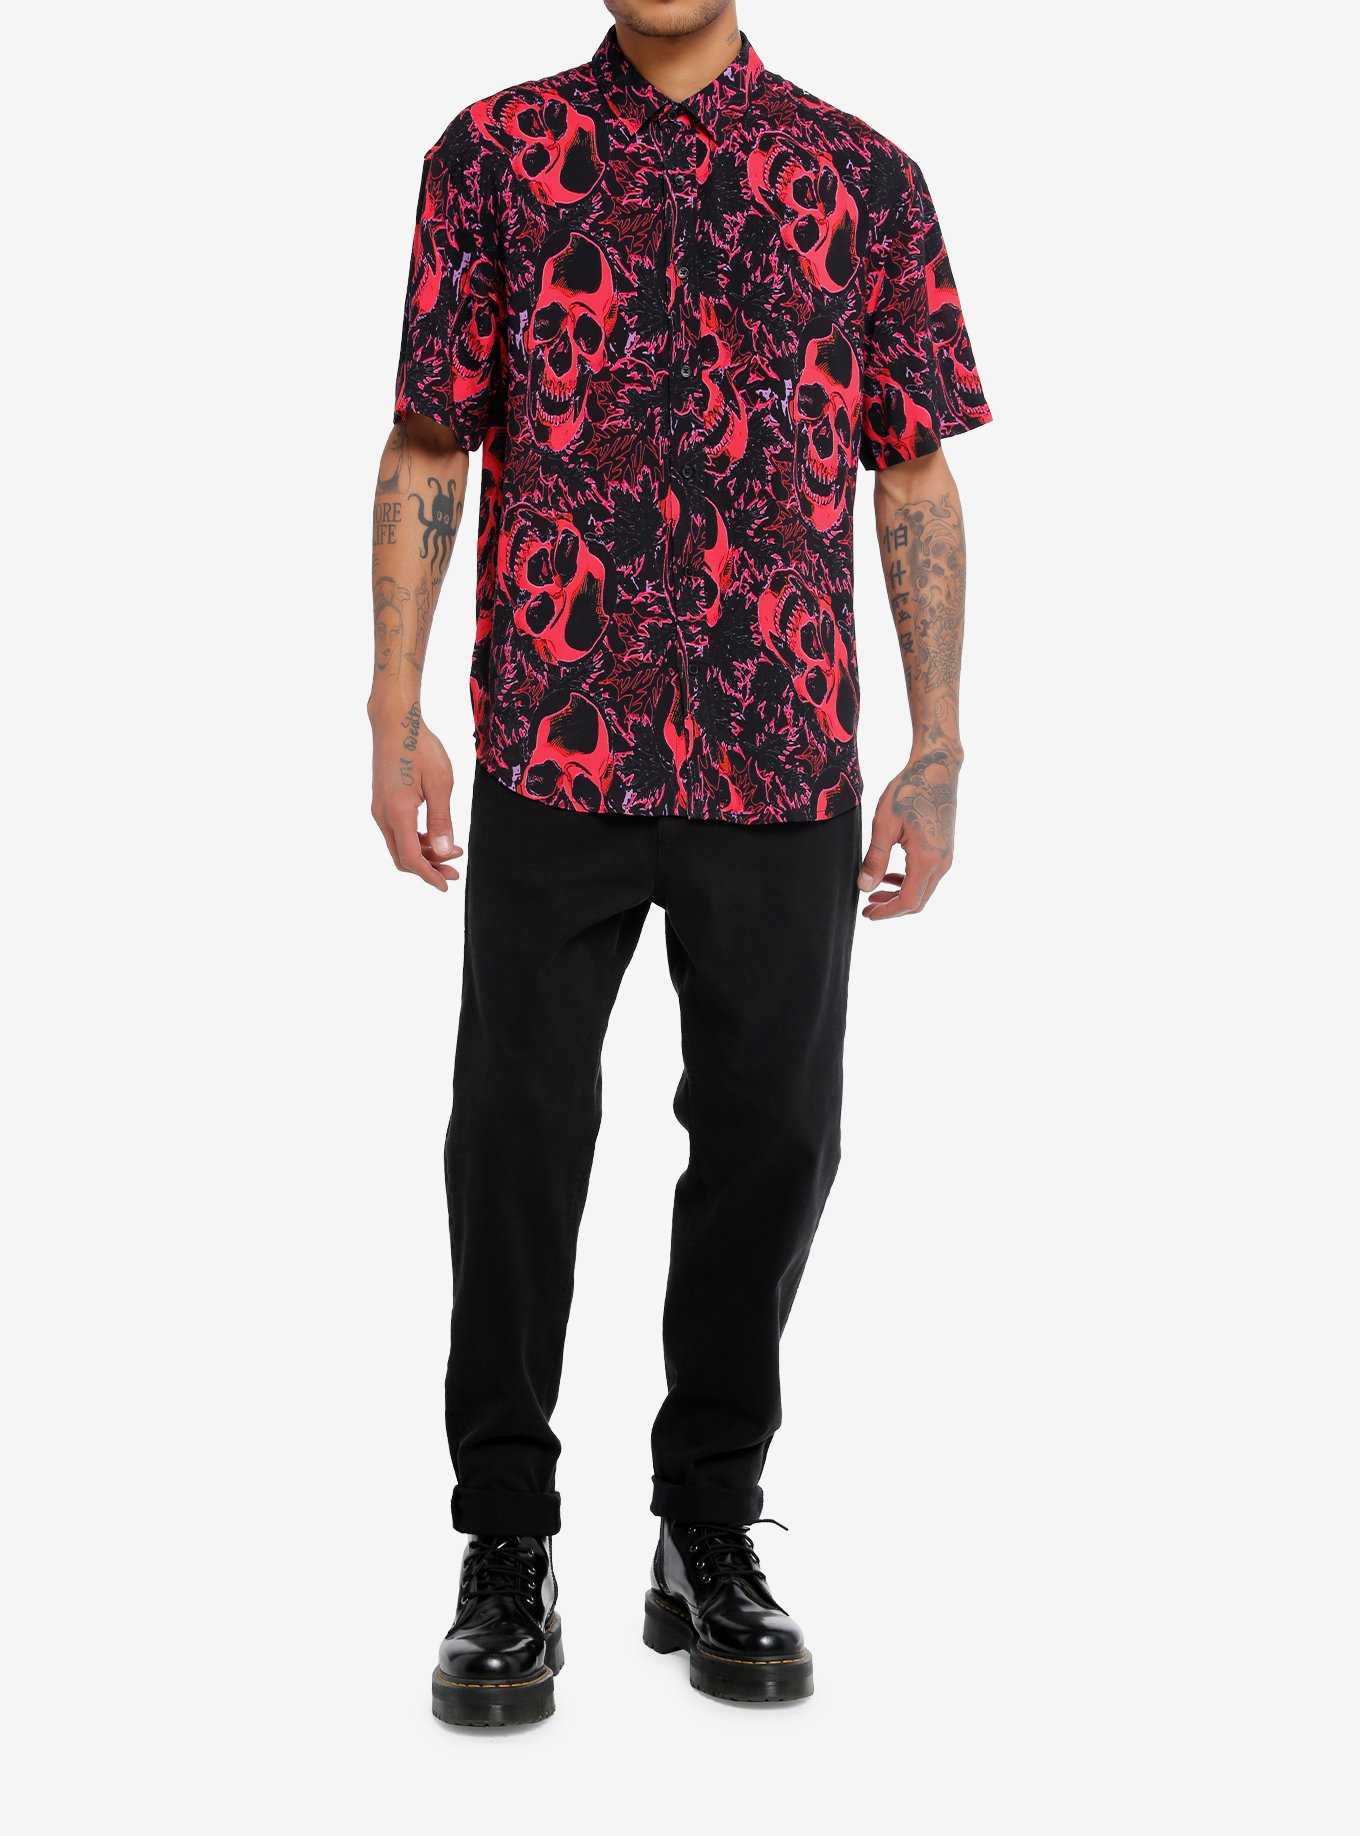 Warped Skulls Oversized Woven Button-Up, , hi-res